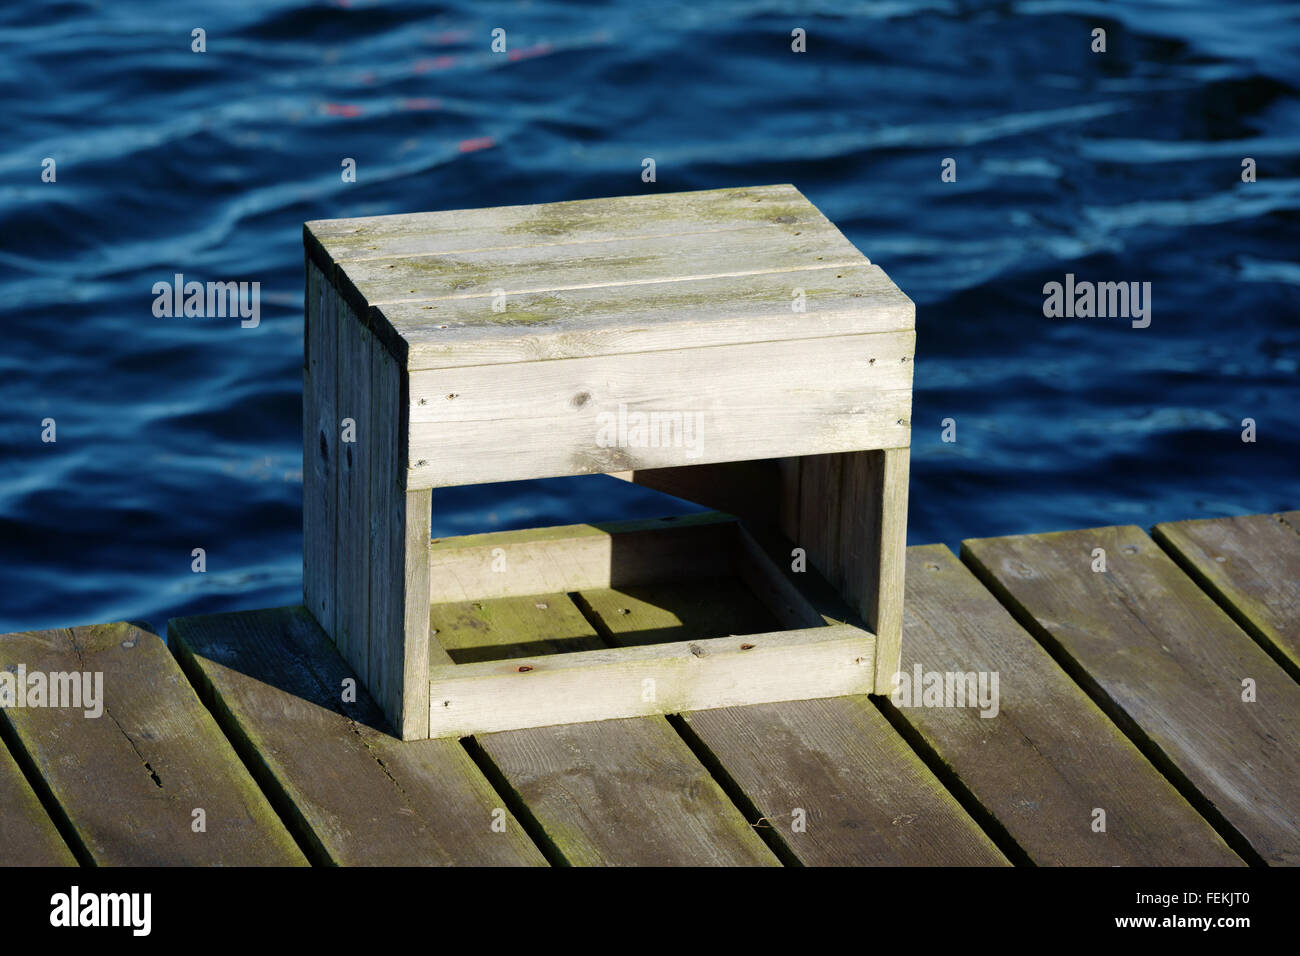 A wooden crate stand alone close to the edge of a pier with water in background. Stock Photo